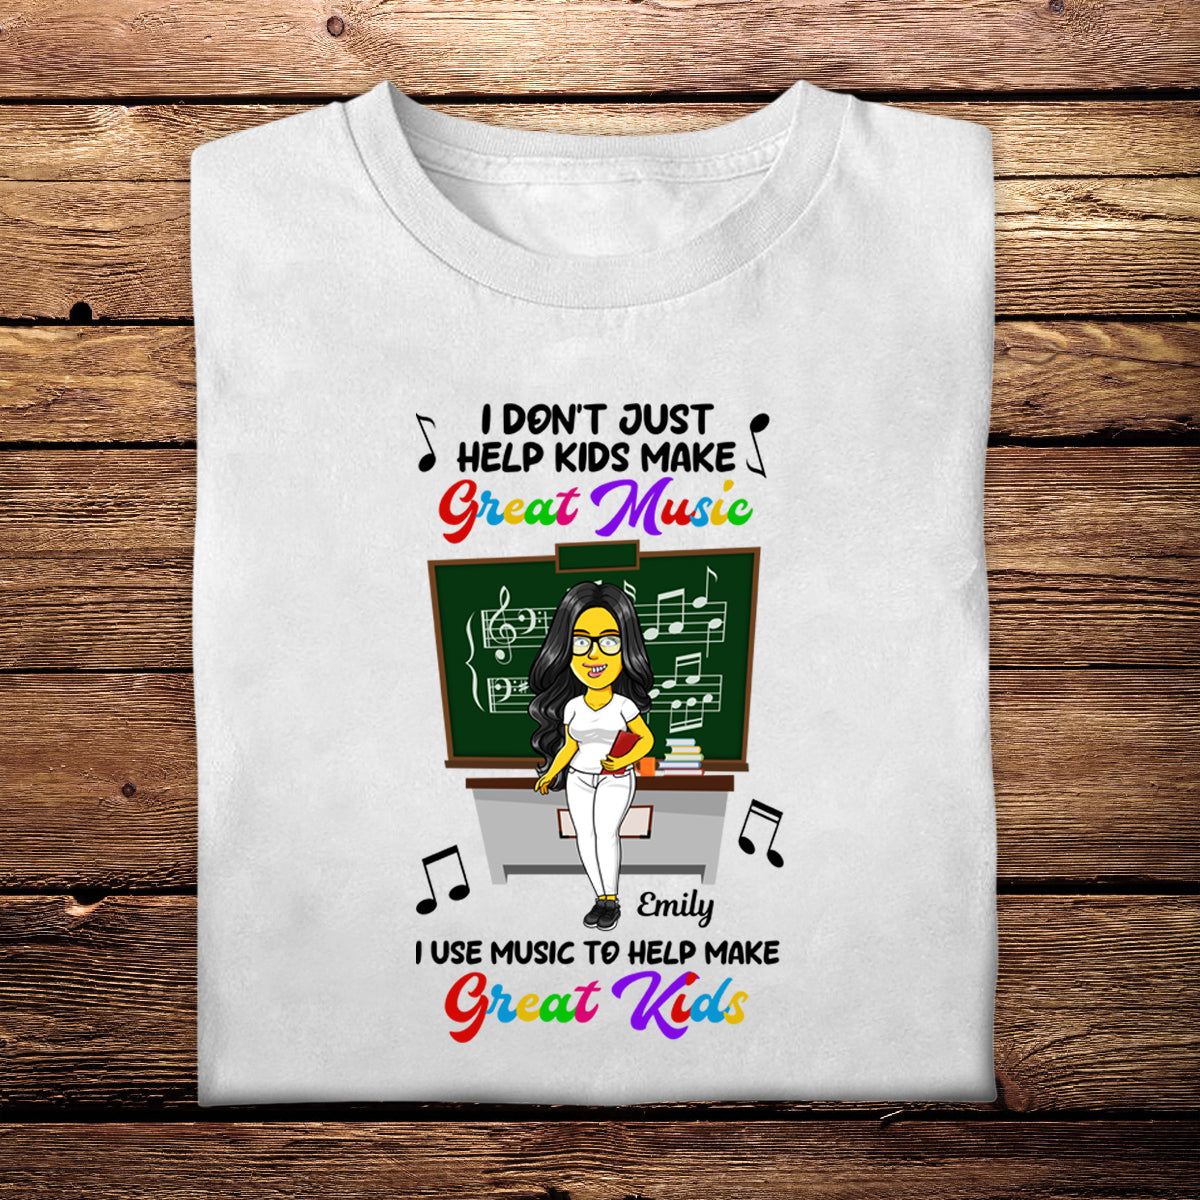 I Use Music To Help Make Great Kids - Personalized Apparel - Gift For Teacher